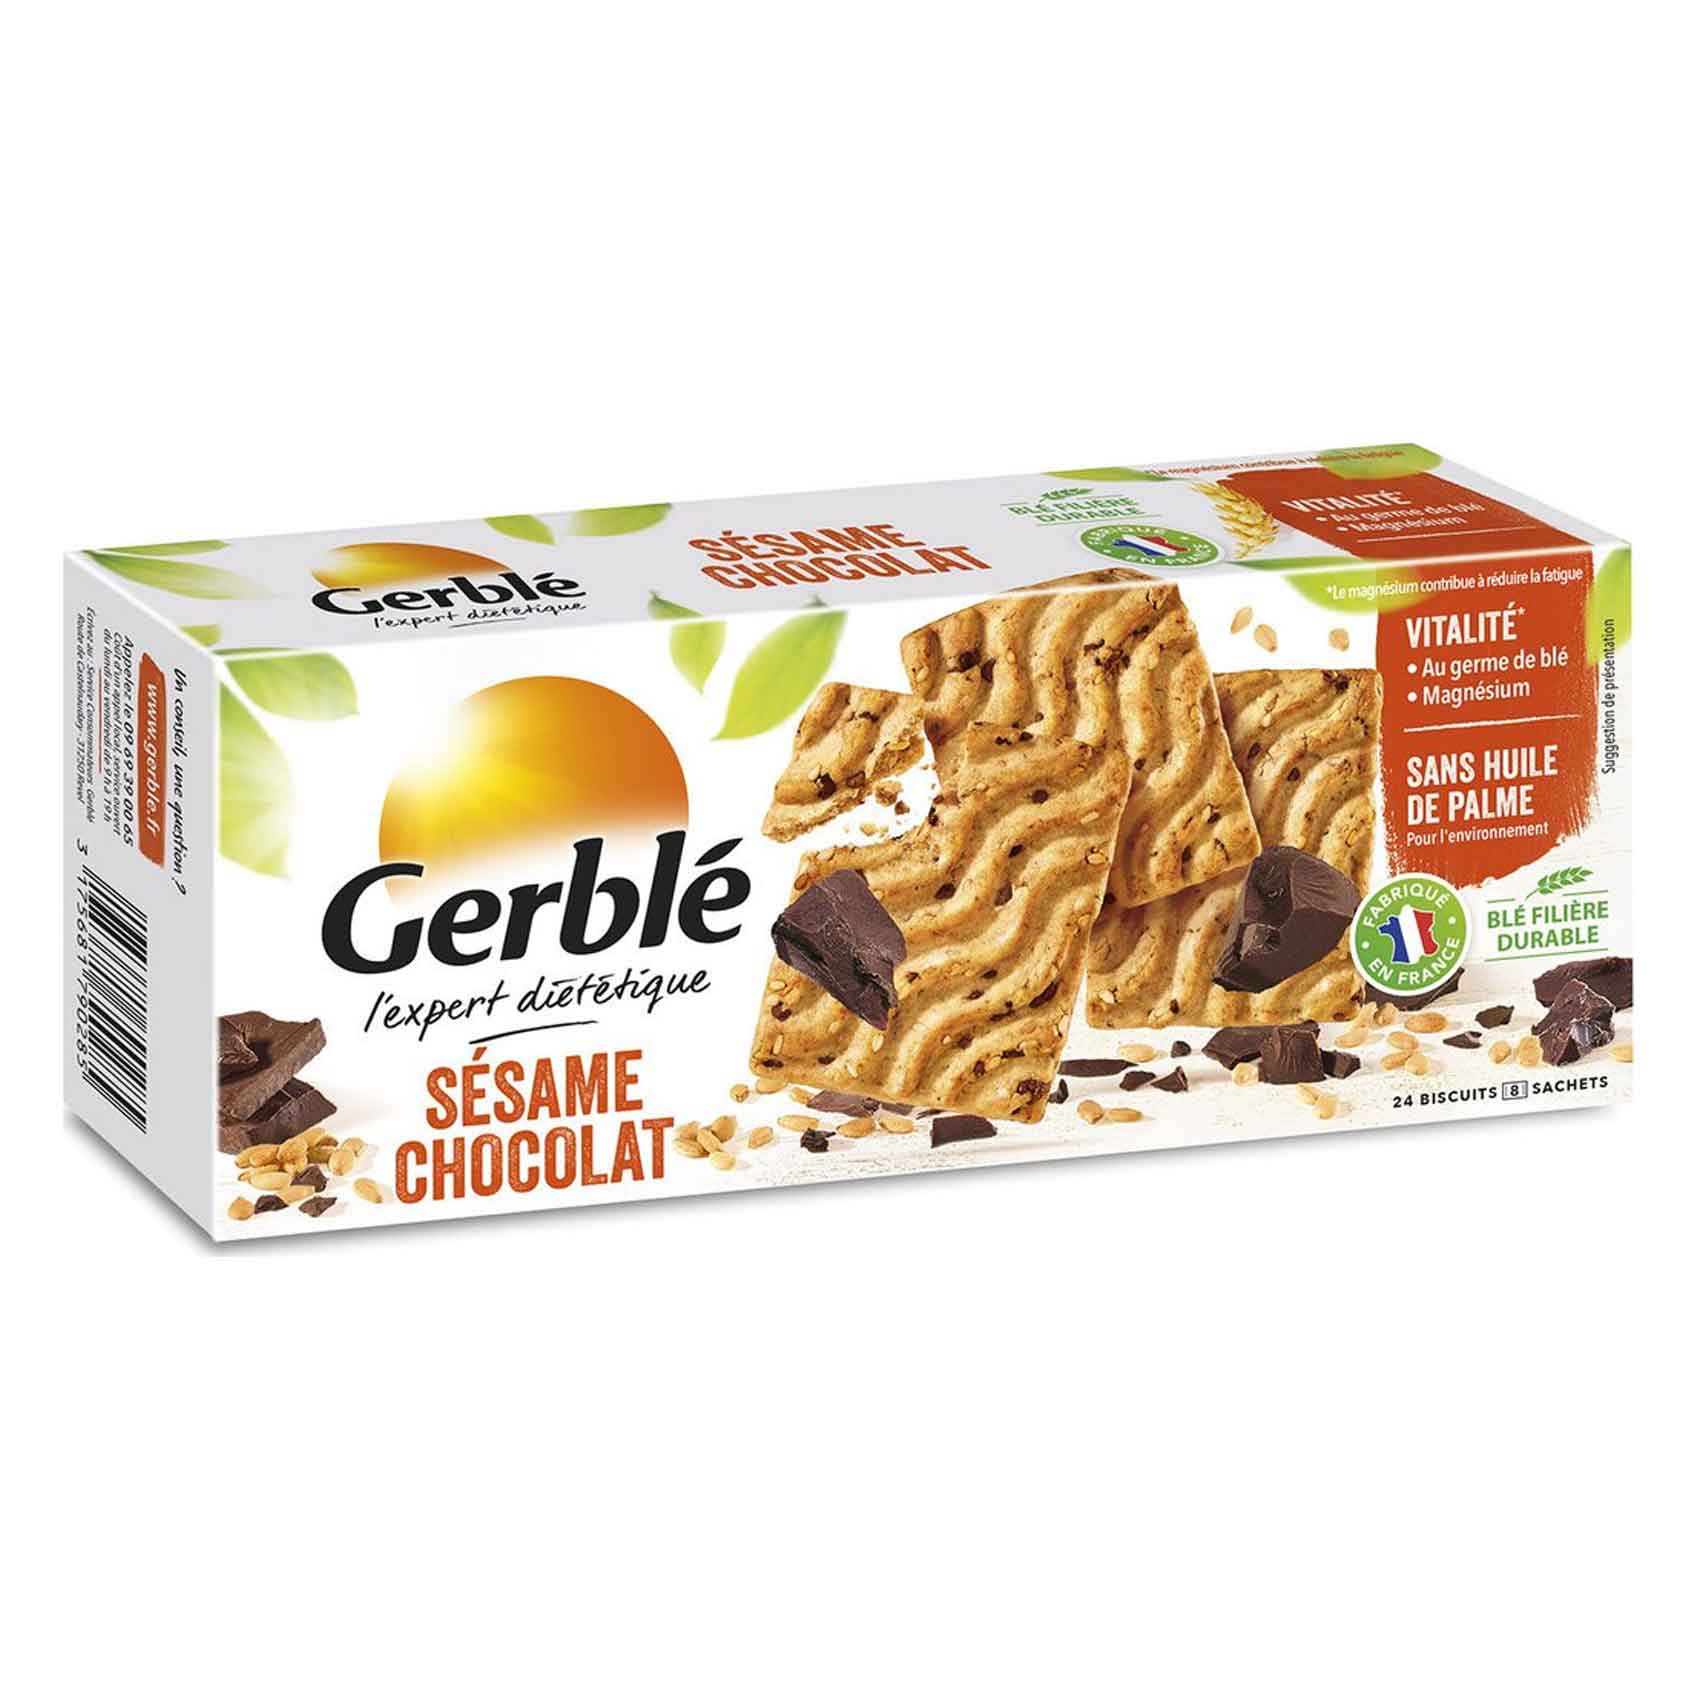 Gerble Biscuits Sesame Chocolate 200GR